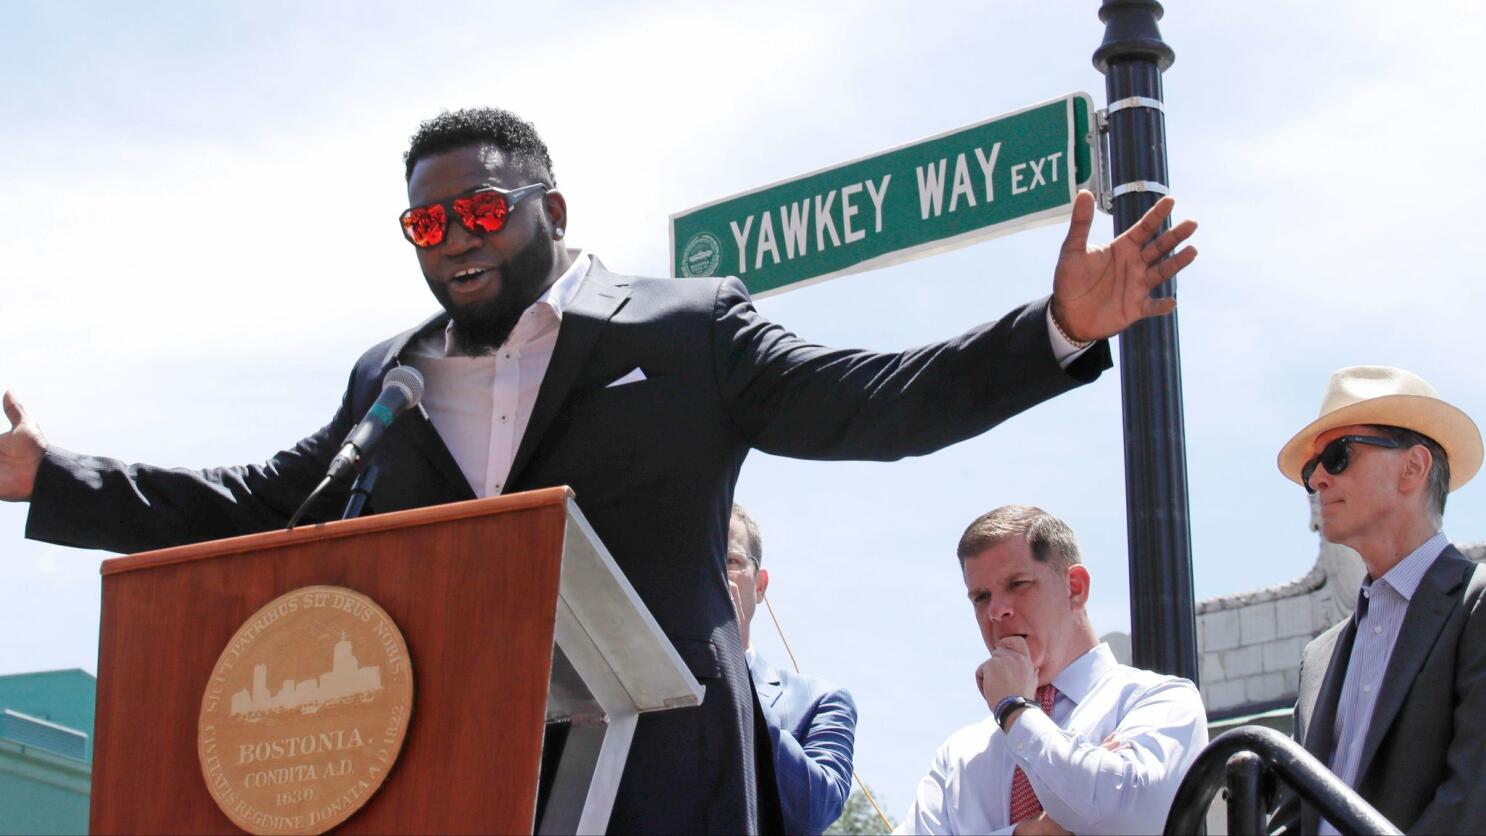 Red Sox owner John Henry wants to rename Yawkey Way for David